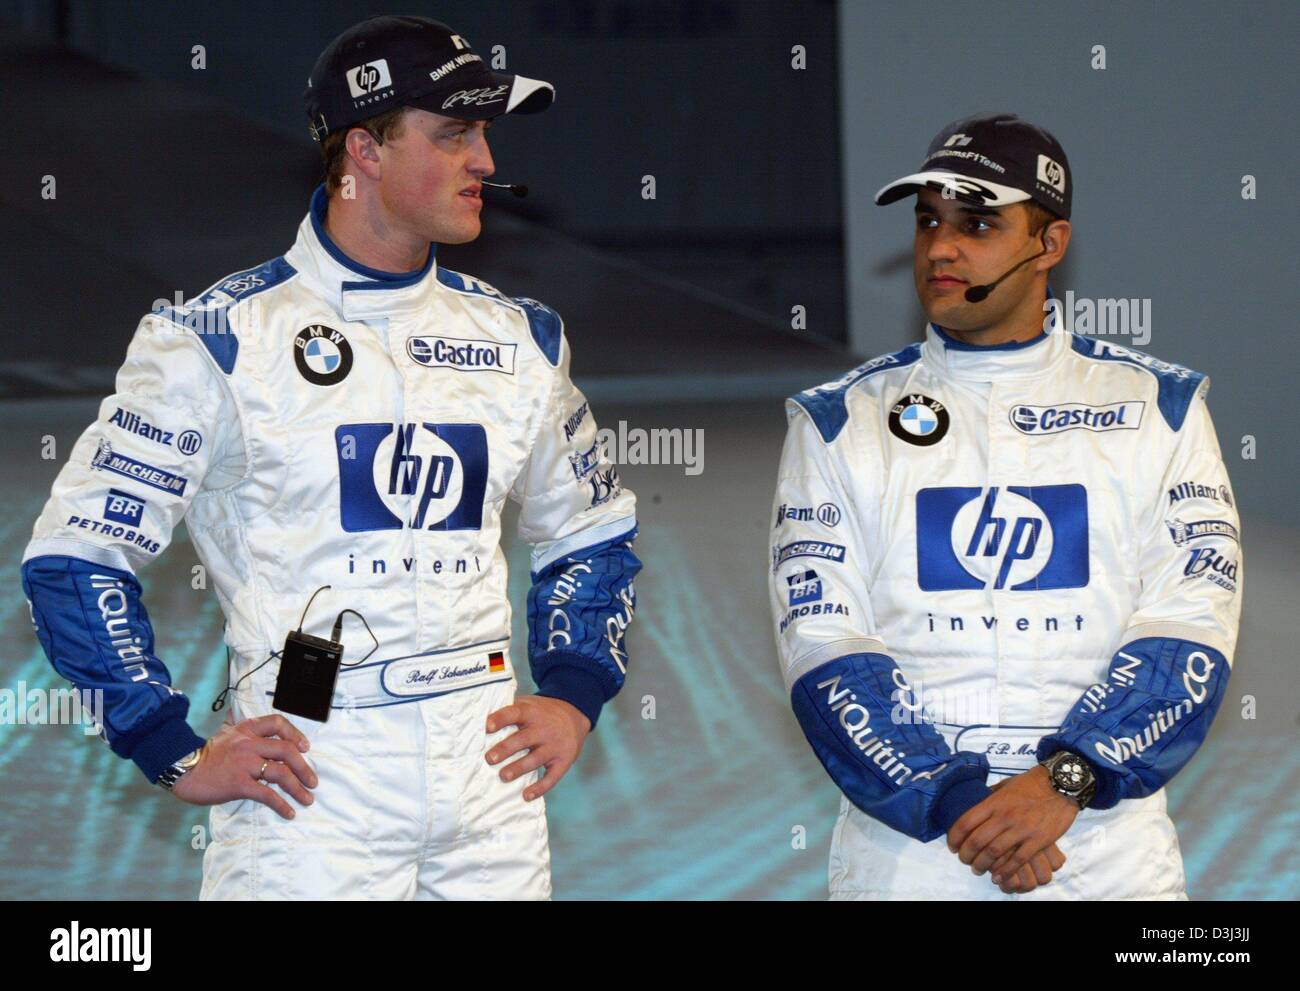 (dpa) - German formula one pilot Ralf Schumacher (L) and his Colombian team mate Juan Pablo Montoya pictured during the presentation of the new BMW-Williams FW26 racing car for the upcoming season, in Valencia, Spain, 5 January 2004. The car has a new aerodynamic concept and a new motor. The FW26 will be intensively tested in Jerez, Spain, as of 7 January 2004. Stock Photo